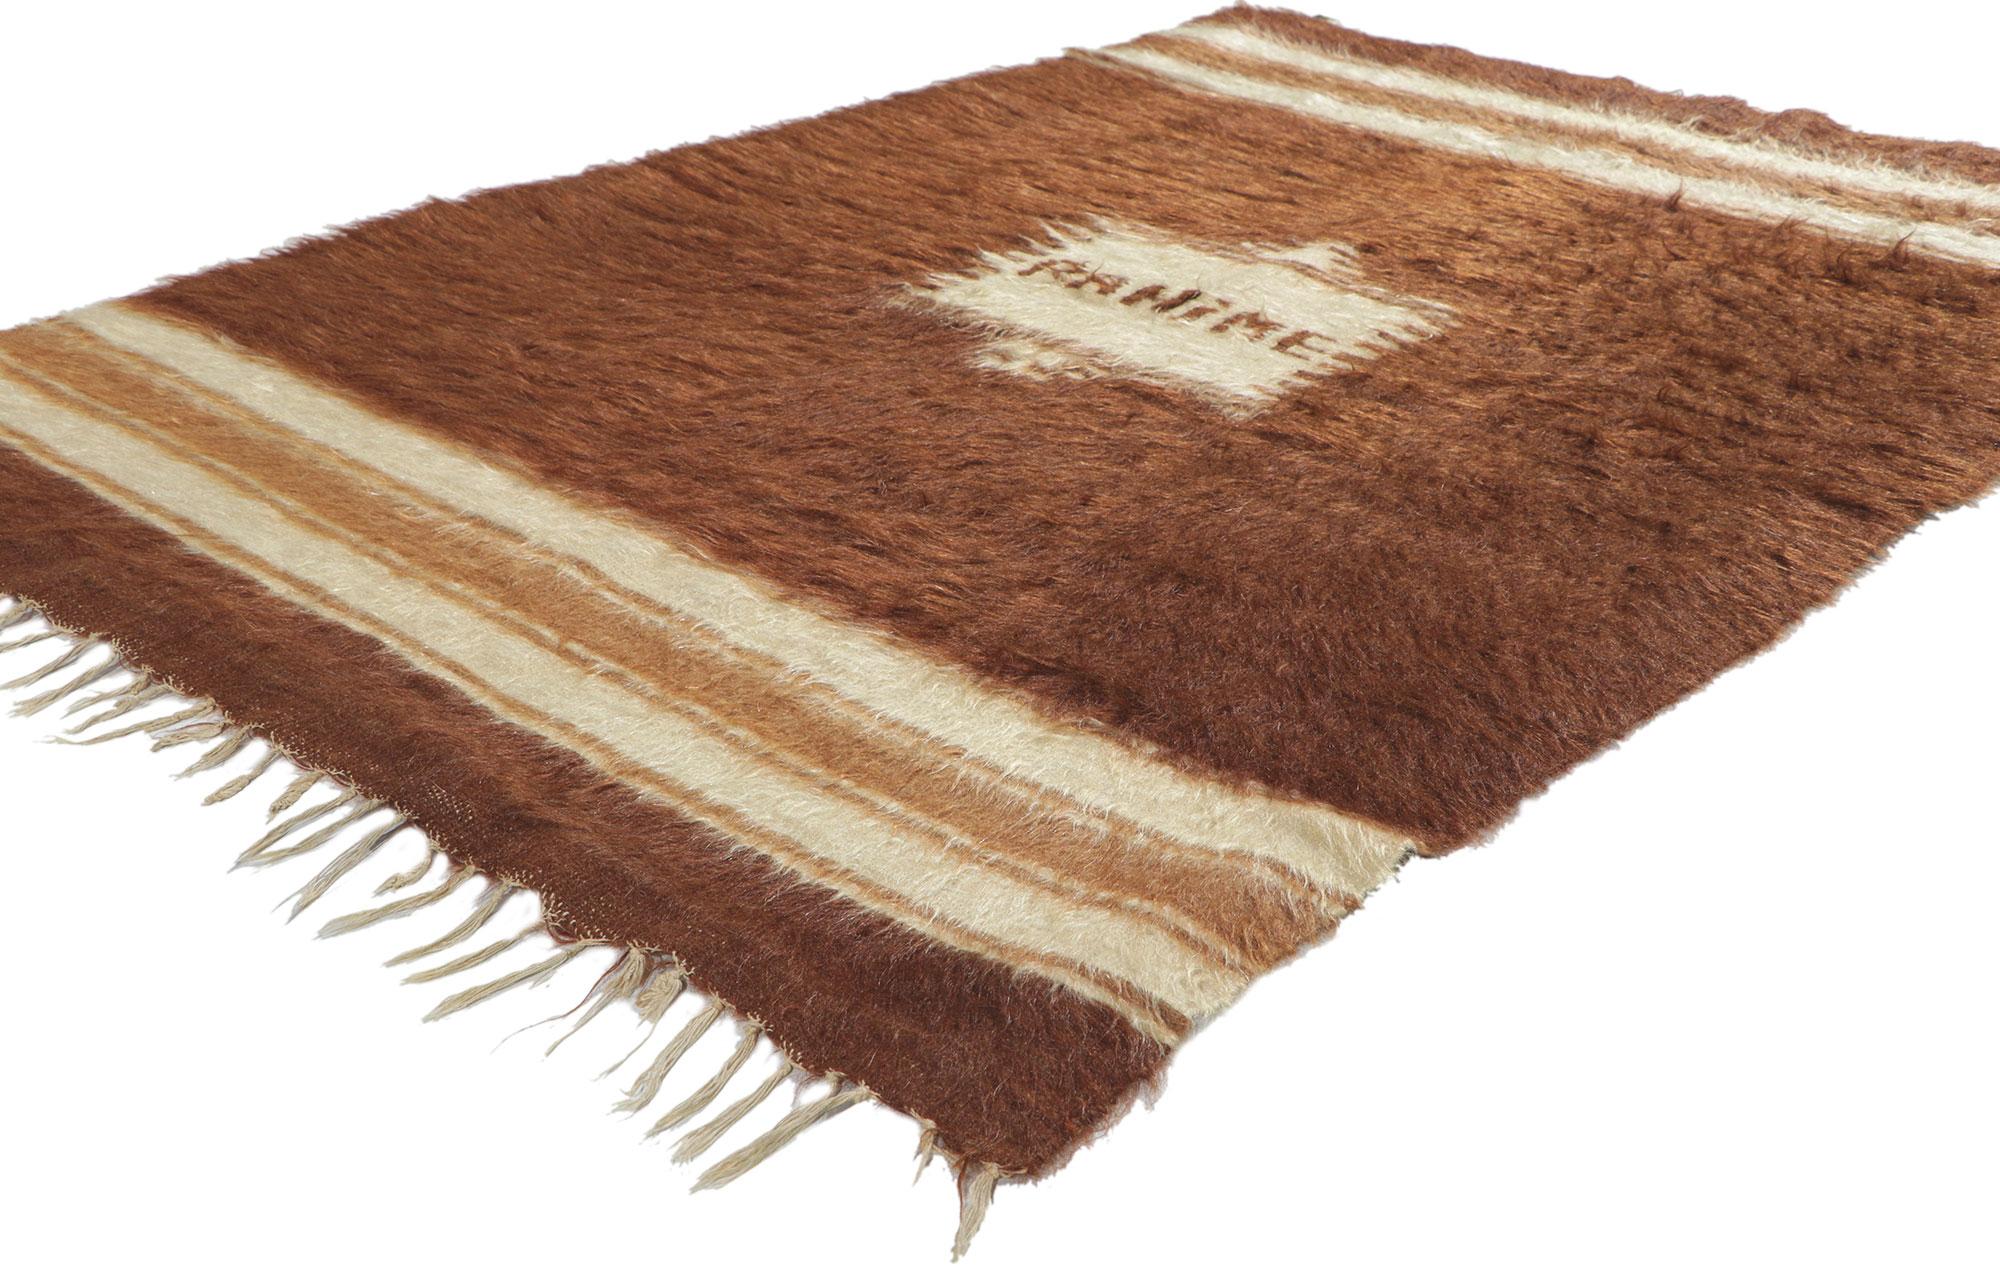 53842 vintage Turkish Angora wool Kilim Blanket rug, 03'09 x 05'06. With its shaggy pile, incredible detail and texture, this handwoven Turkish angora kilim rug is a captivating vision of woven beauty. The eye-catching geometric design and earthy